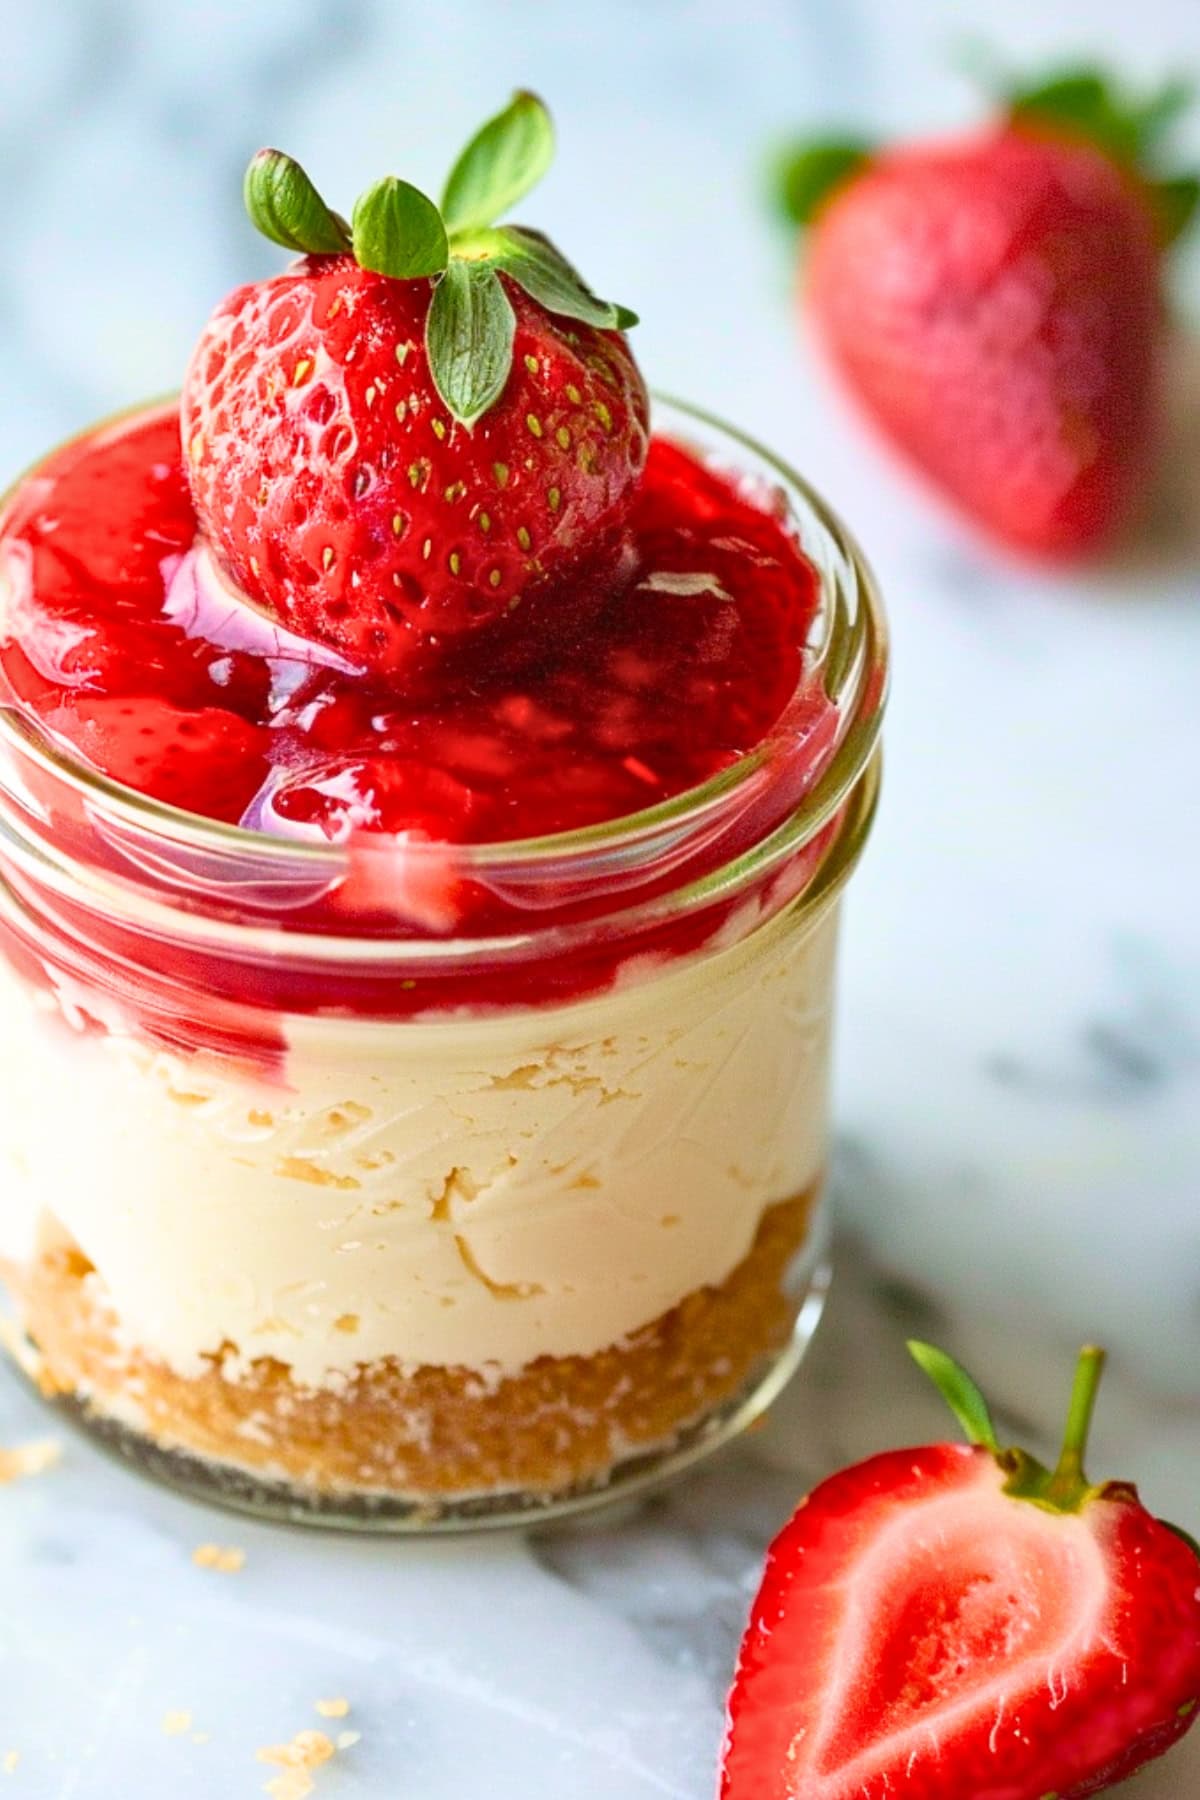 Jar of cheesecake with strawberry on top.